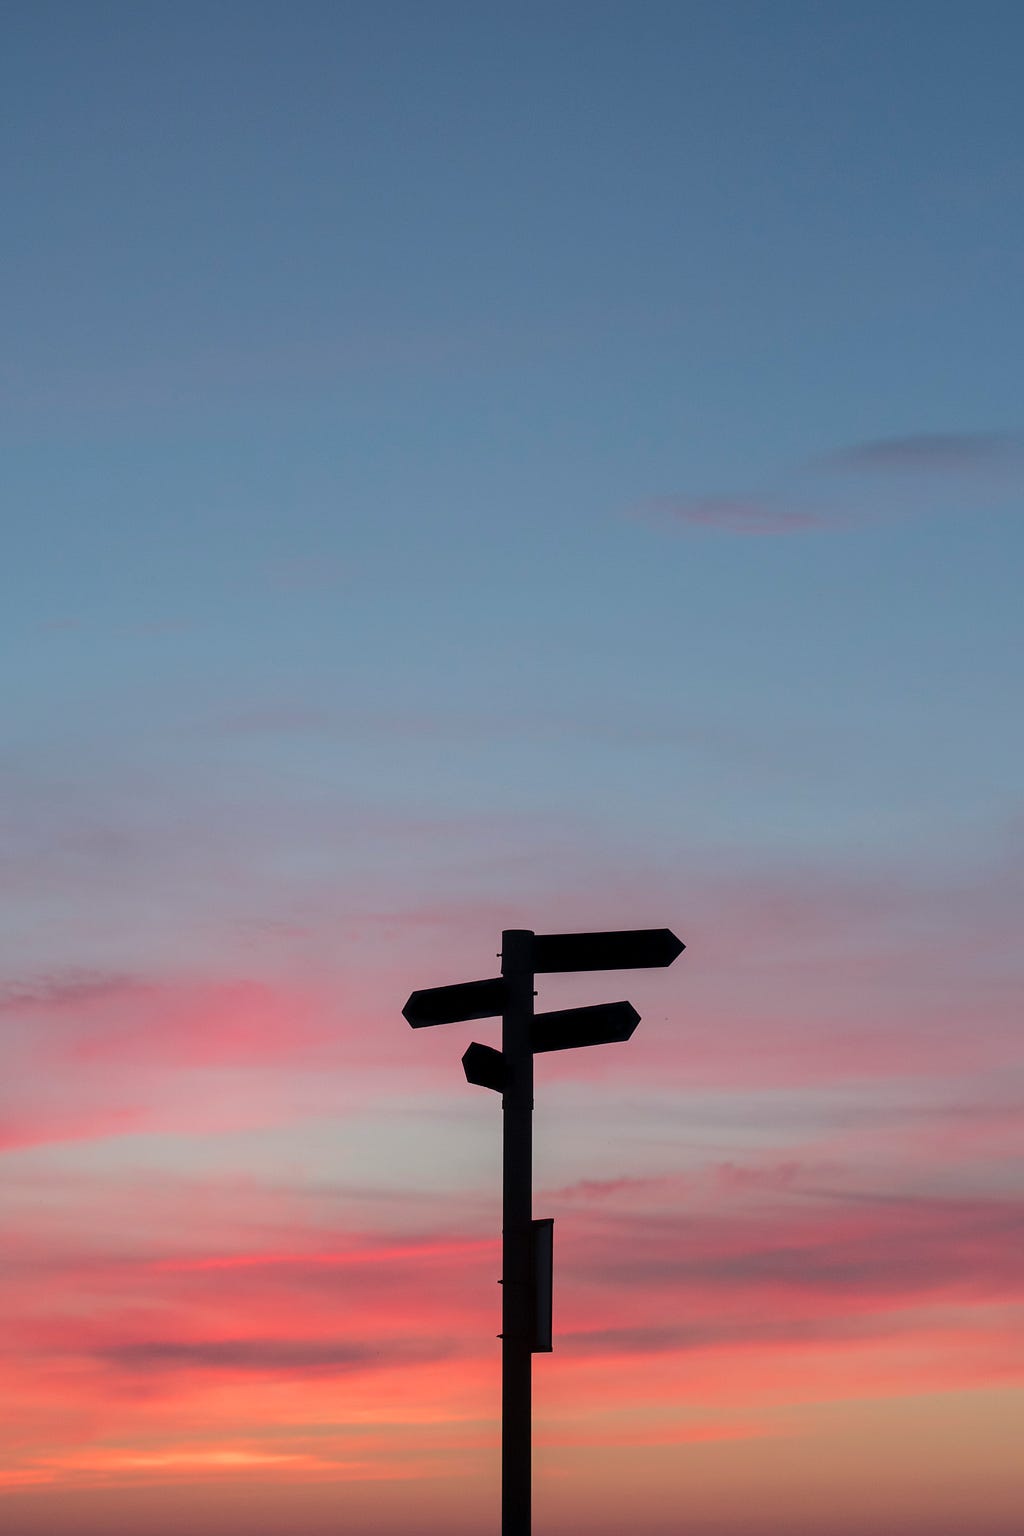 A signpost stands silhouetted against the sky at sunset.